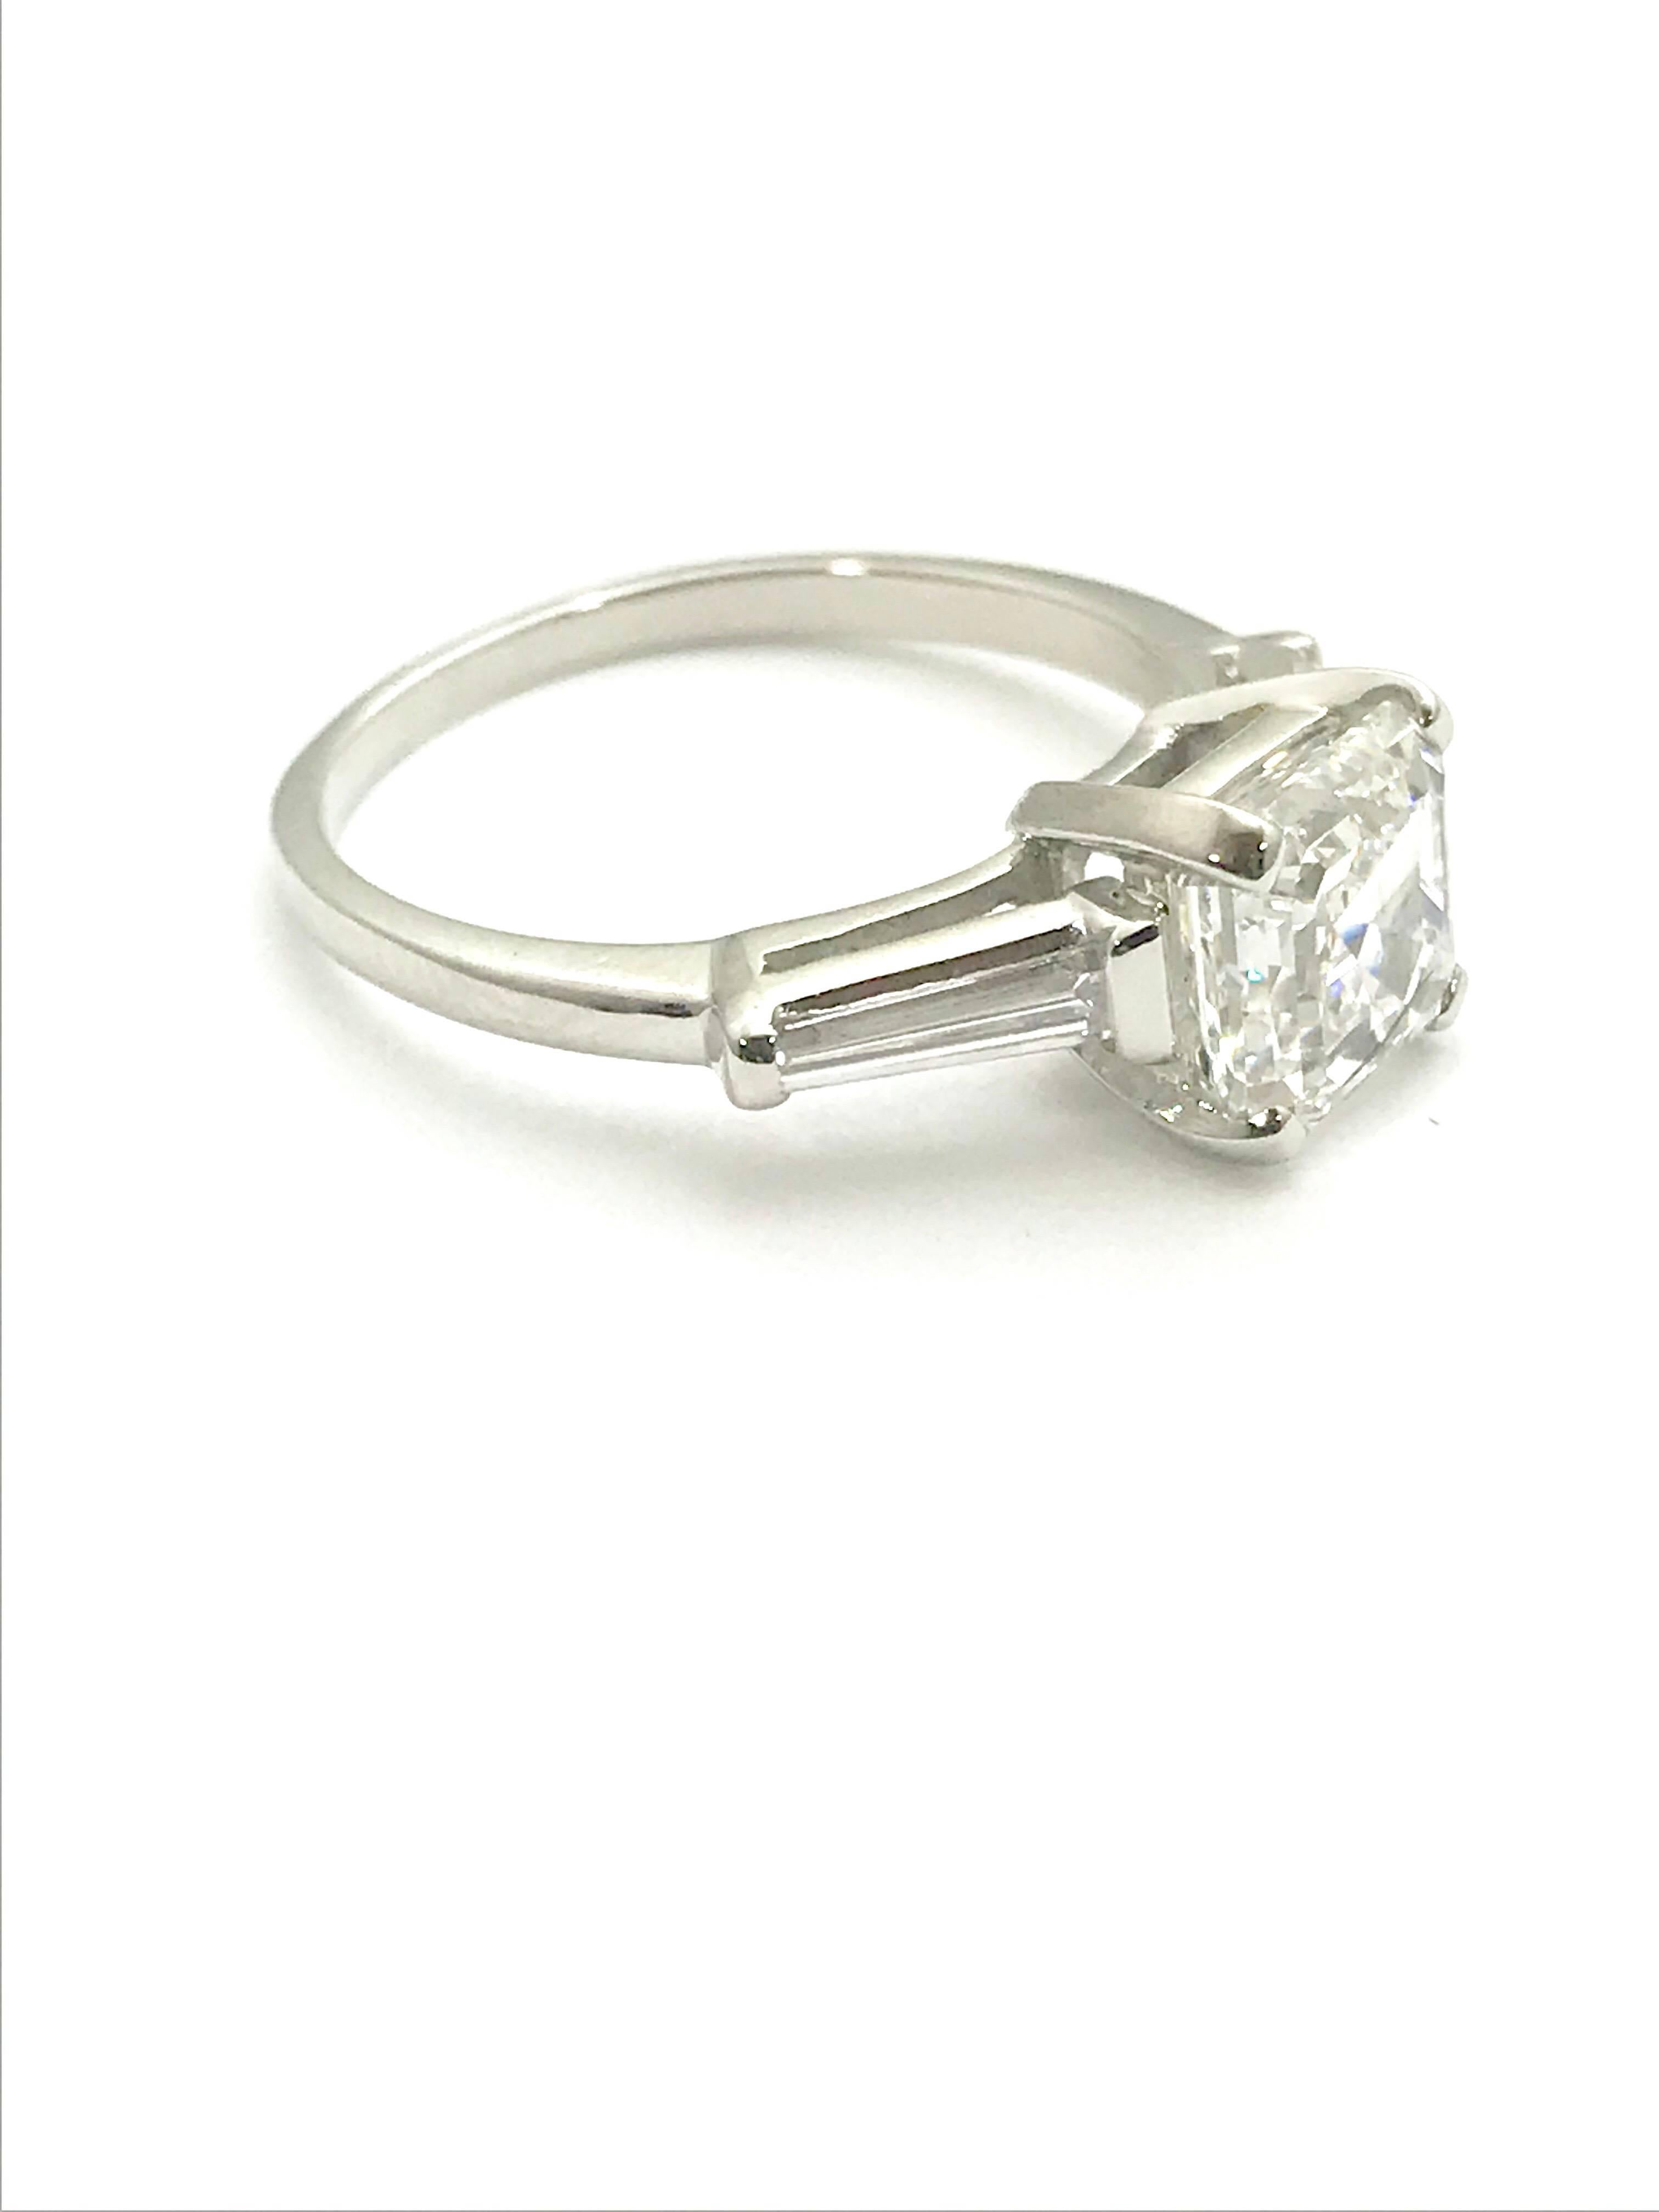 A 2.01 carat asscher cut diamond and tapered baguette platinum engagement ring.  The asscher cut diamond is graded by GIA as a D color, VS2 clarity.  Grading report number 2105632013.  The asscher is set in a four prong basket with two tapered